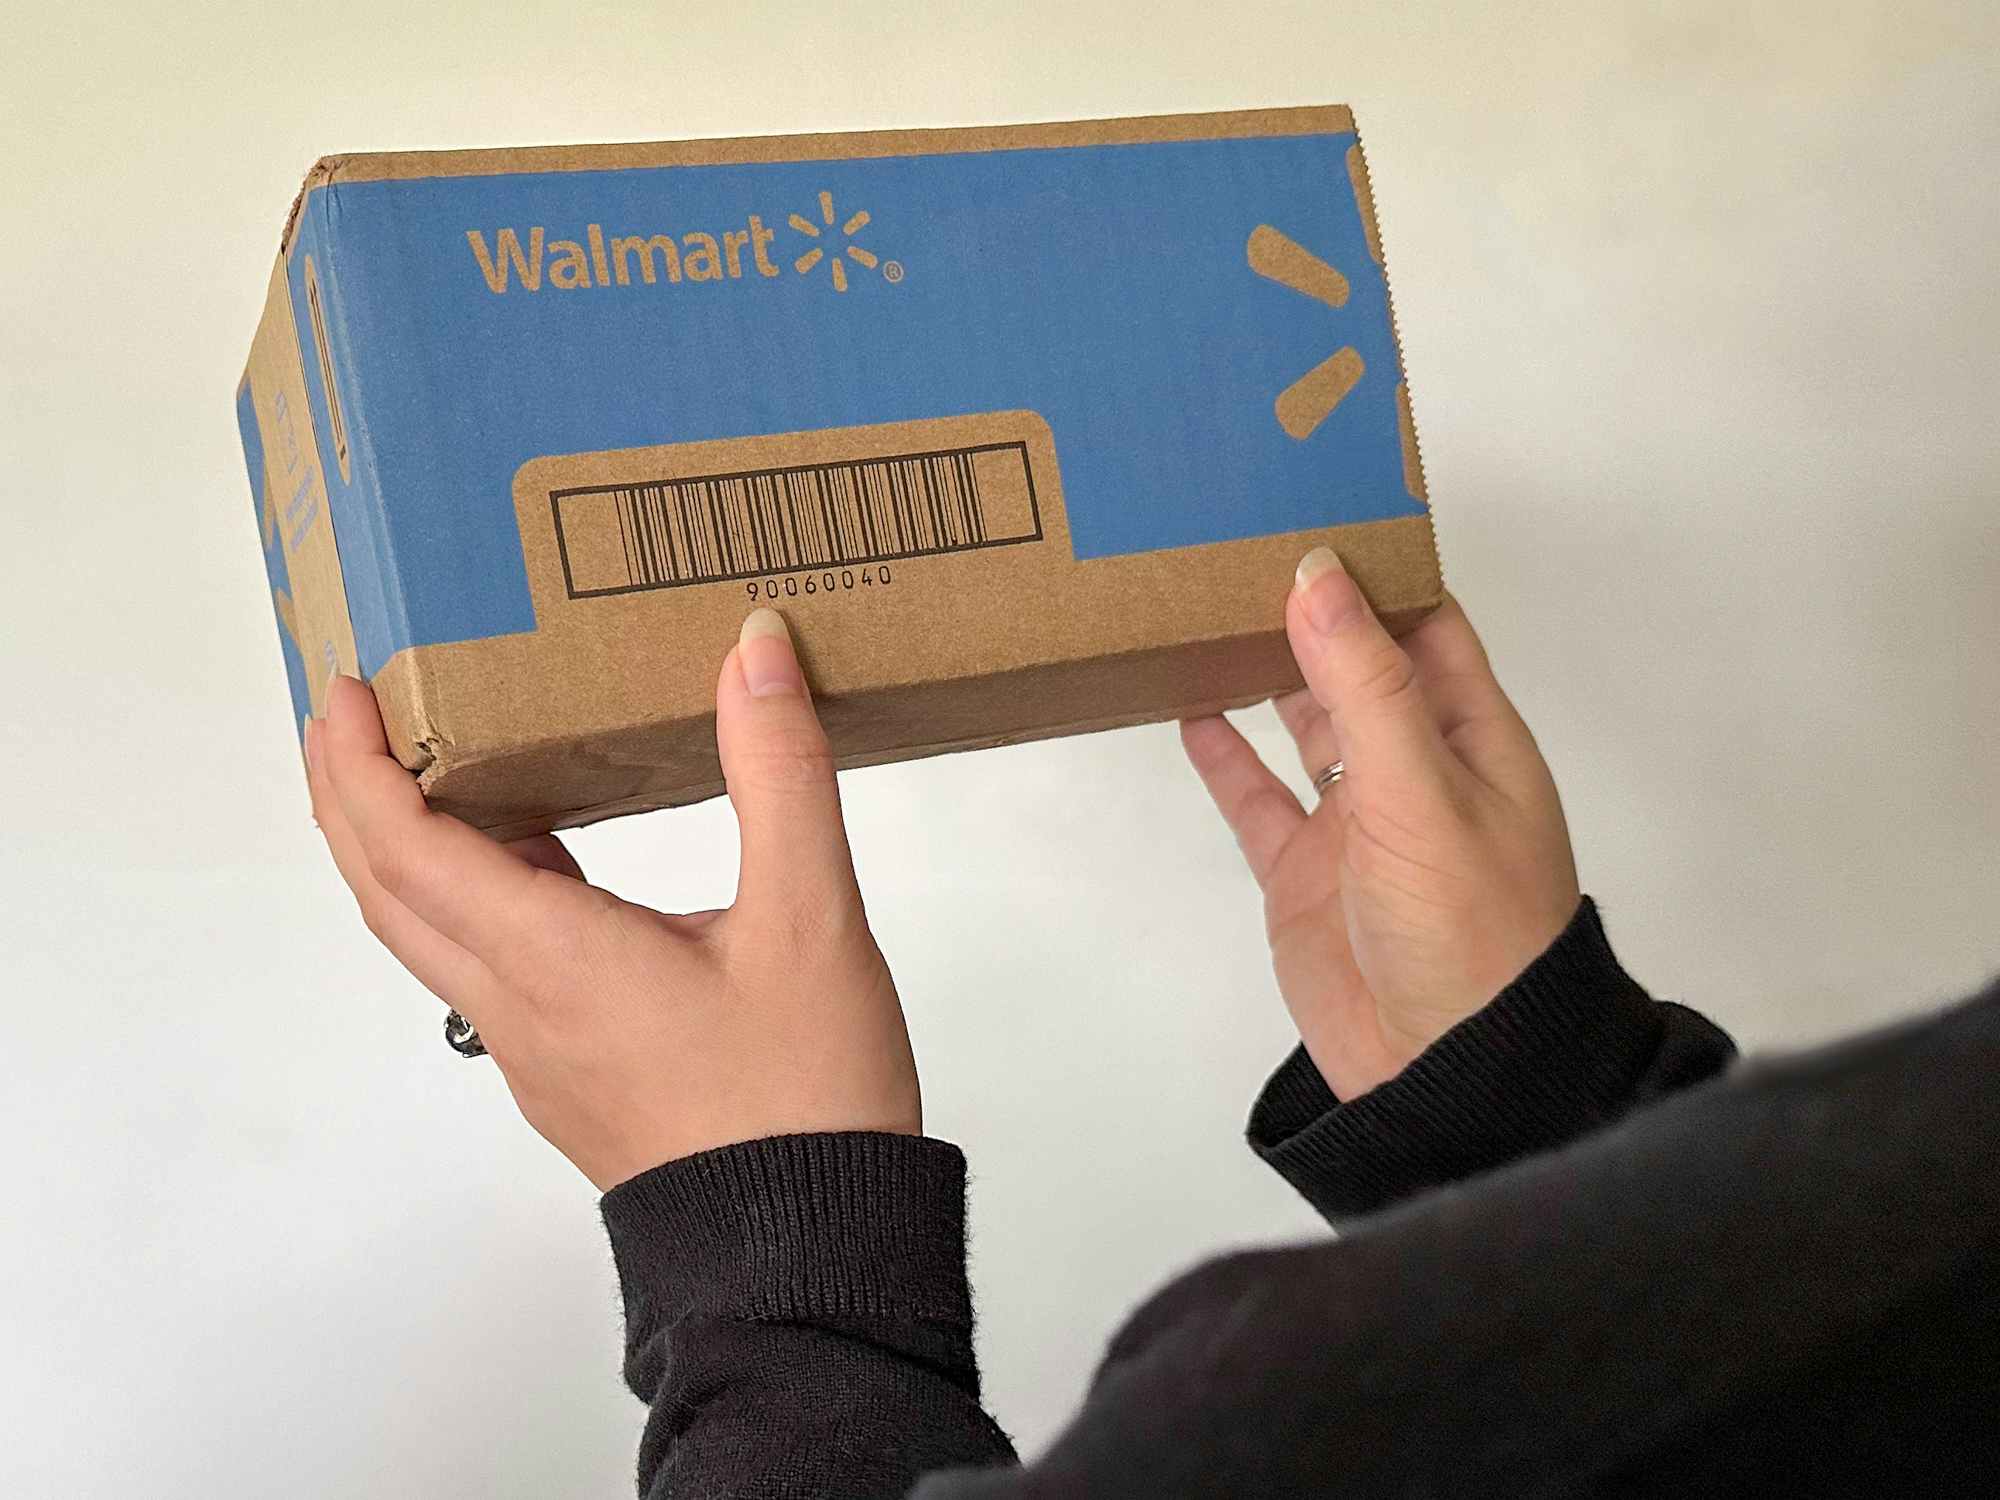 Someone holding up a box shipped from Walmart.com